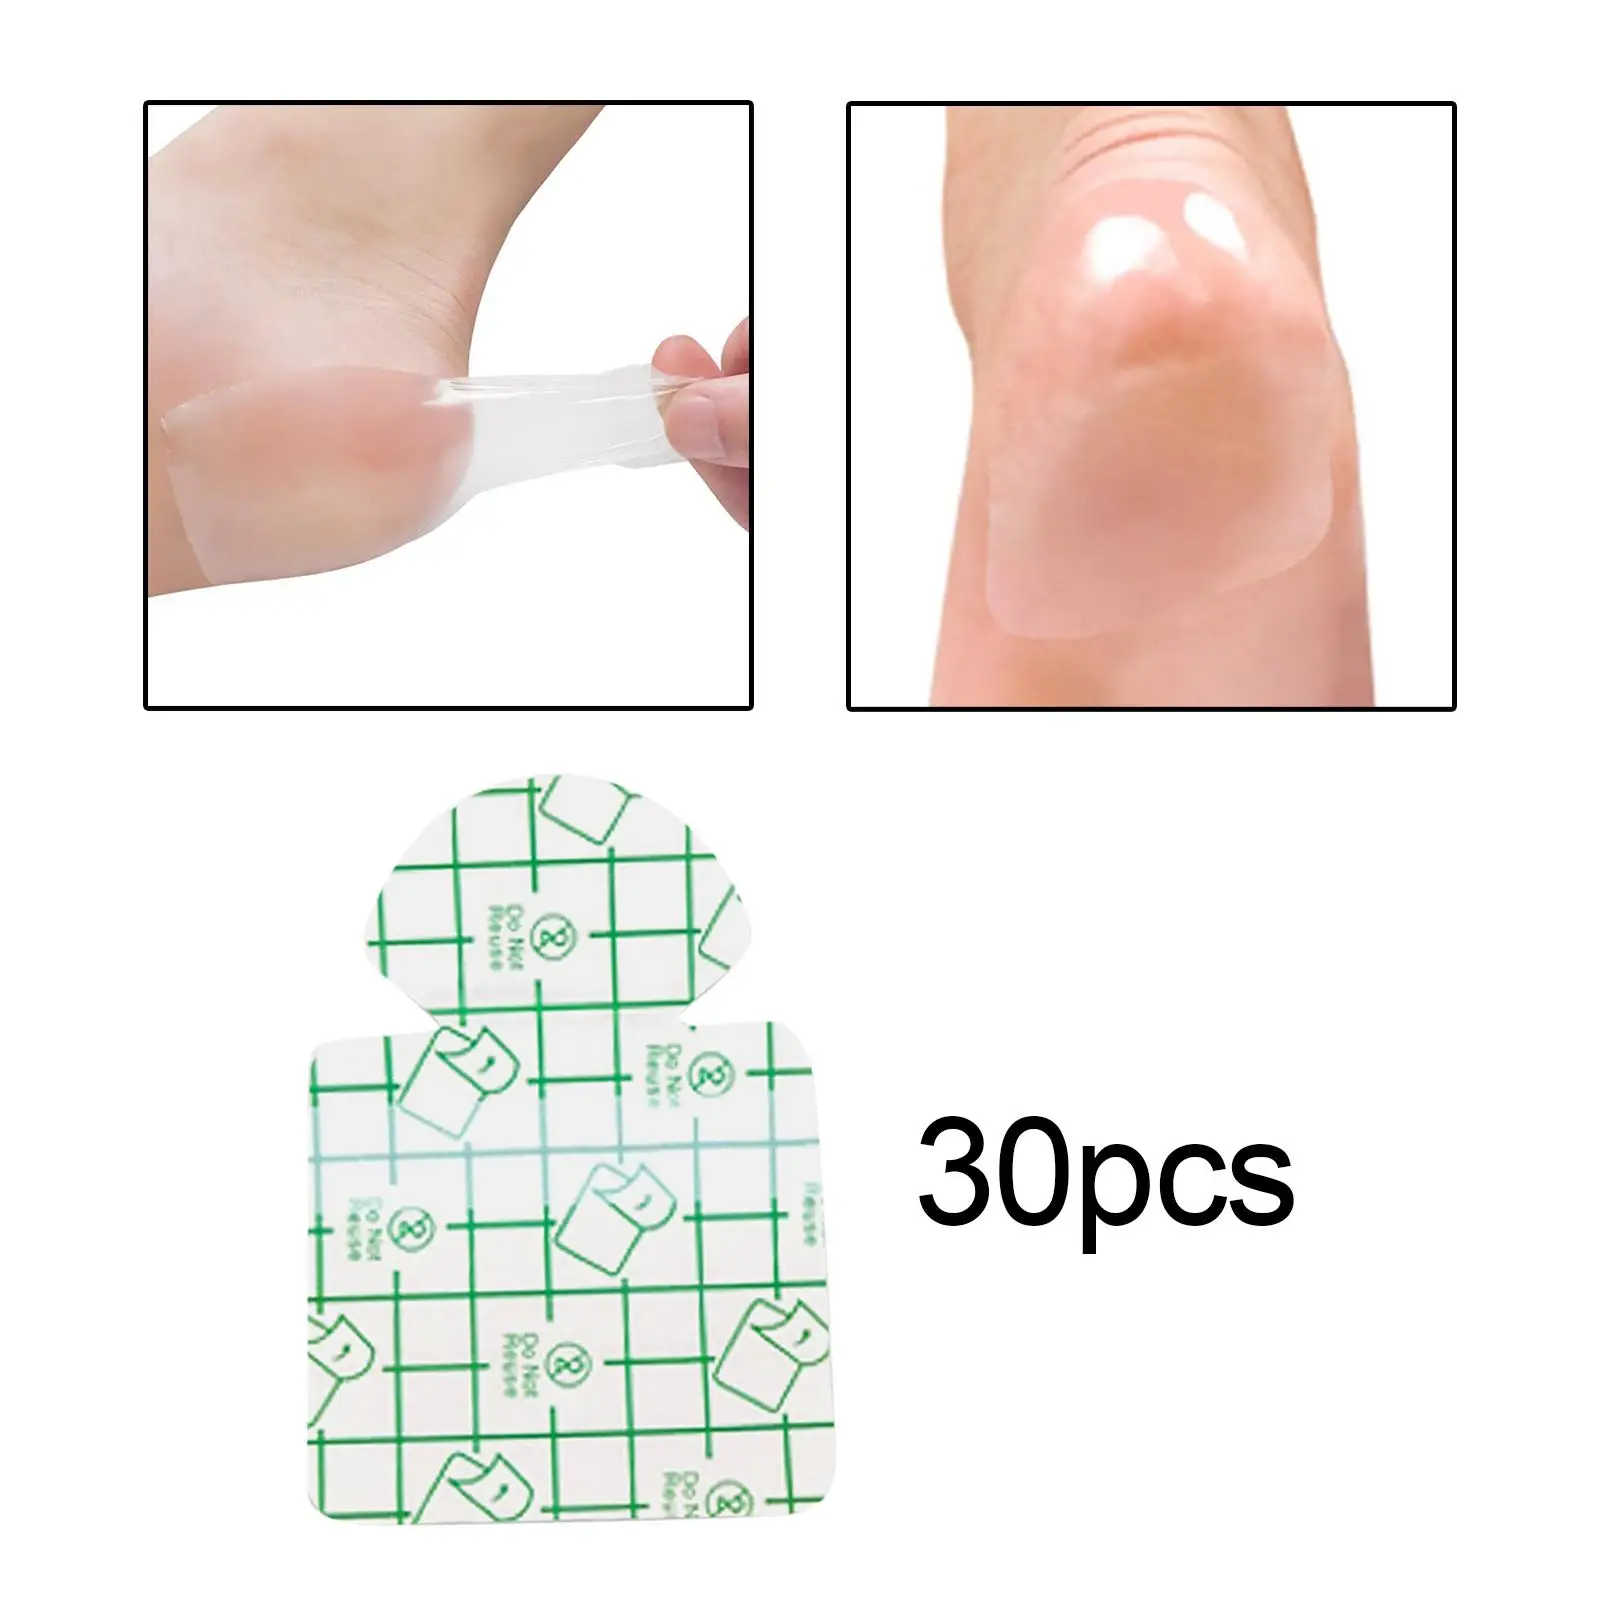 30x Foot Care Sticker Clear Self Adhesive patch Anti Wear Heel Sticker for Men Women Shoes High Heel Sandals